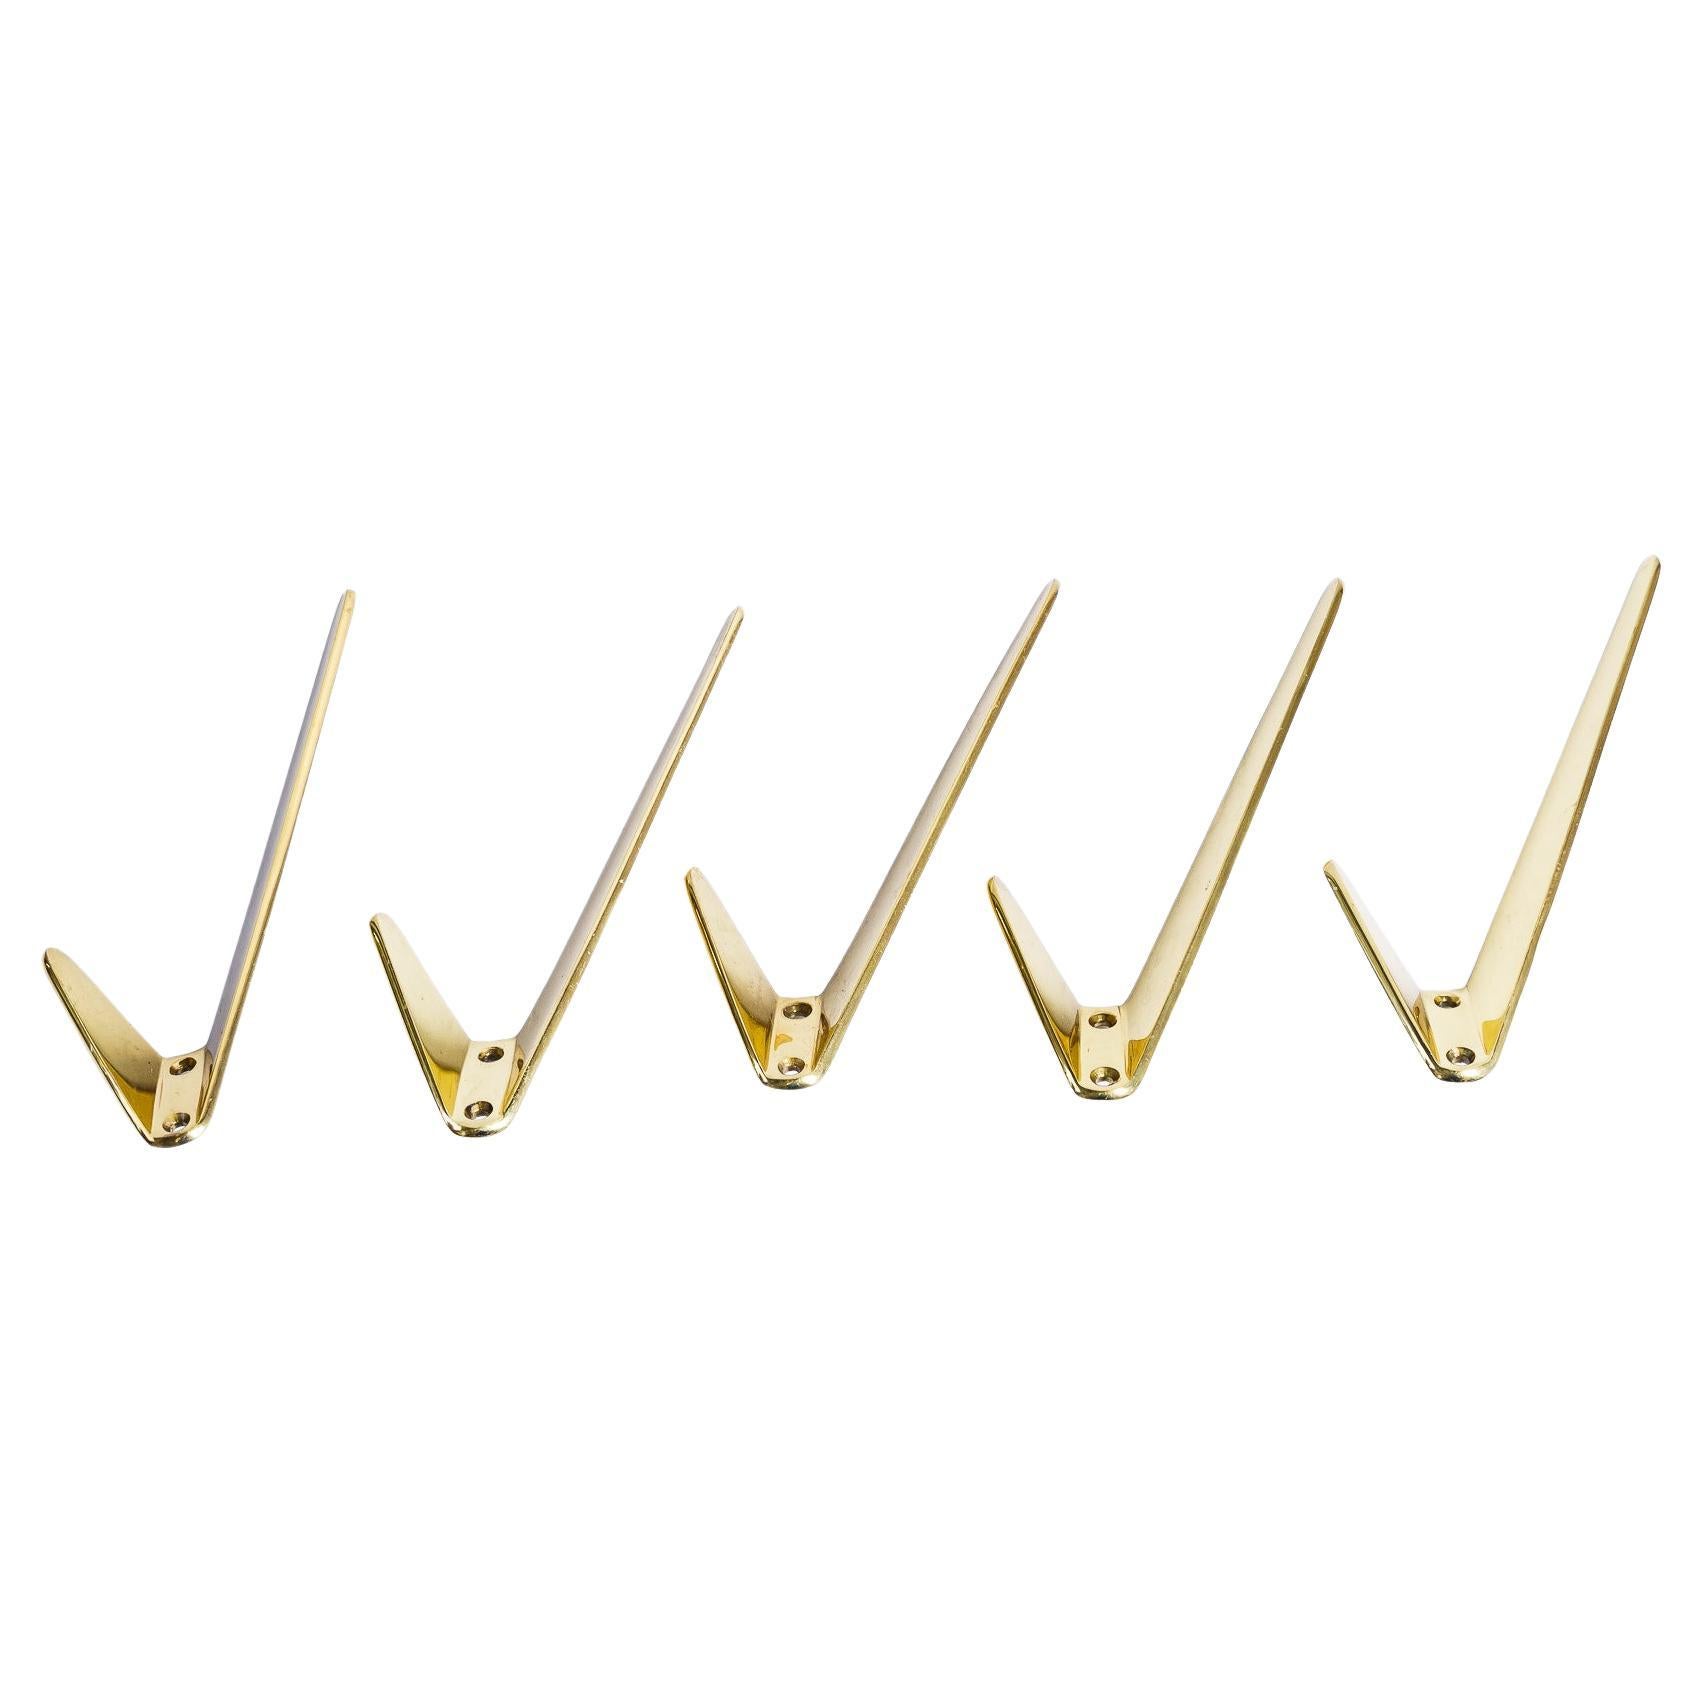 5 Asymetric Wall Hooks by Hertha Baller Austria, 1950s ( price per piece ) For Sale